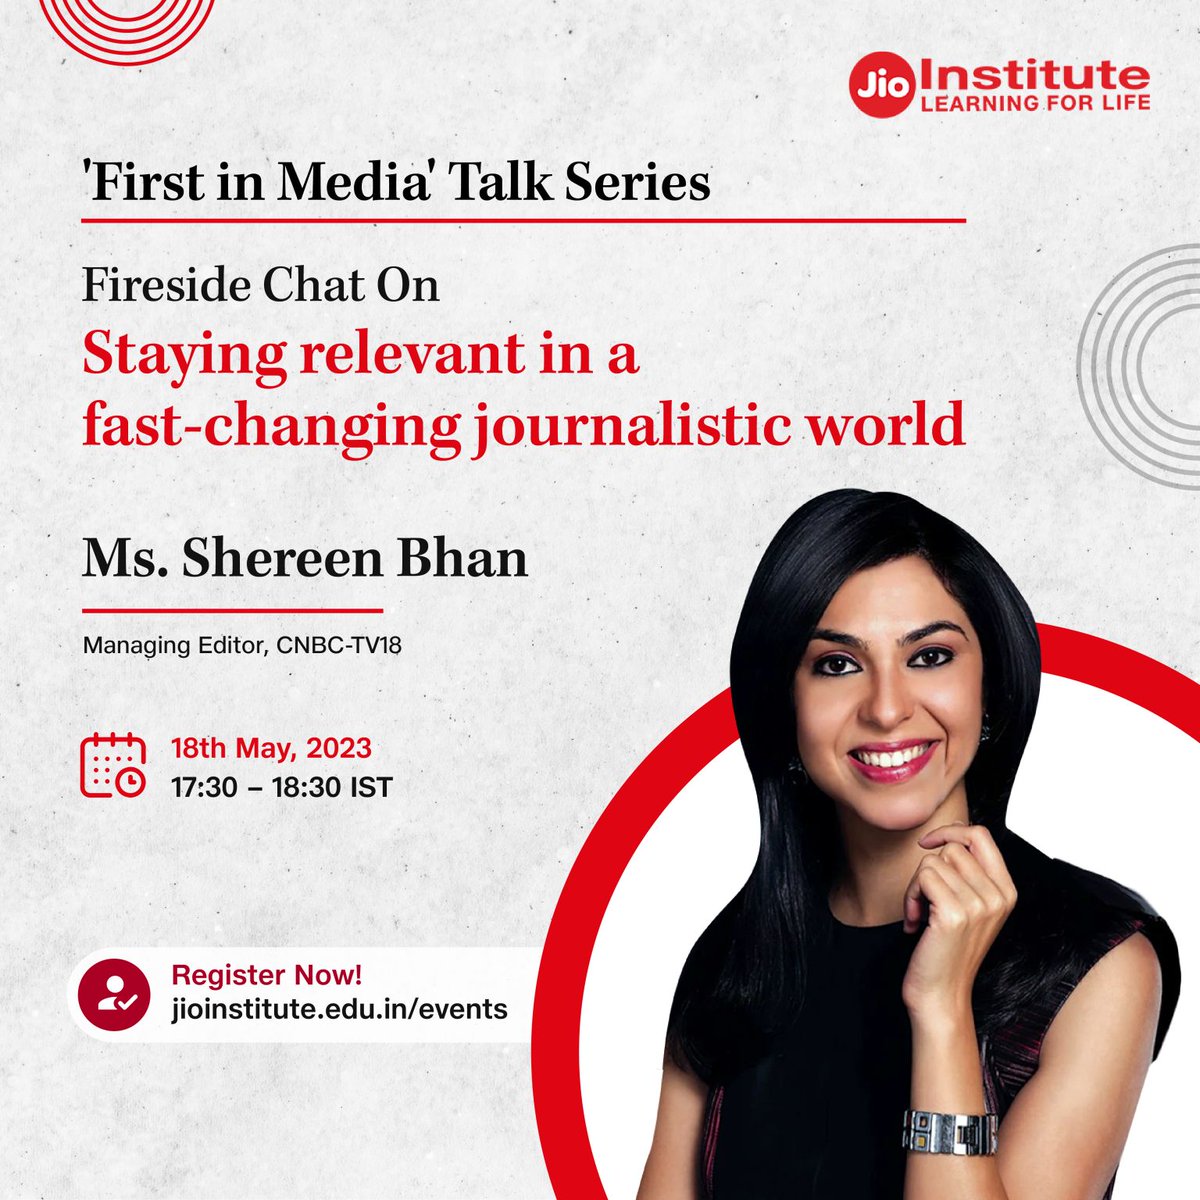 Fireside chat on 'Staying relevant in a fast-changing journalistic world' Join this session with @ShereenBhan, Managing Editor - @CNBCTV18News on 18th May from 5:30 – 6:30 PM Click here to register for the event: bit.ly/3OvDBL5